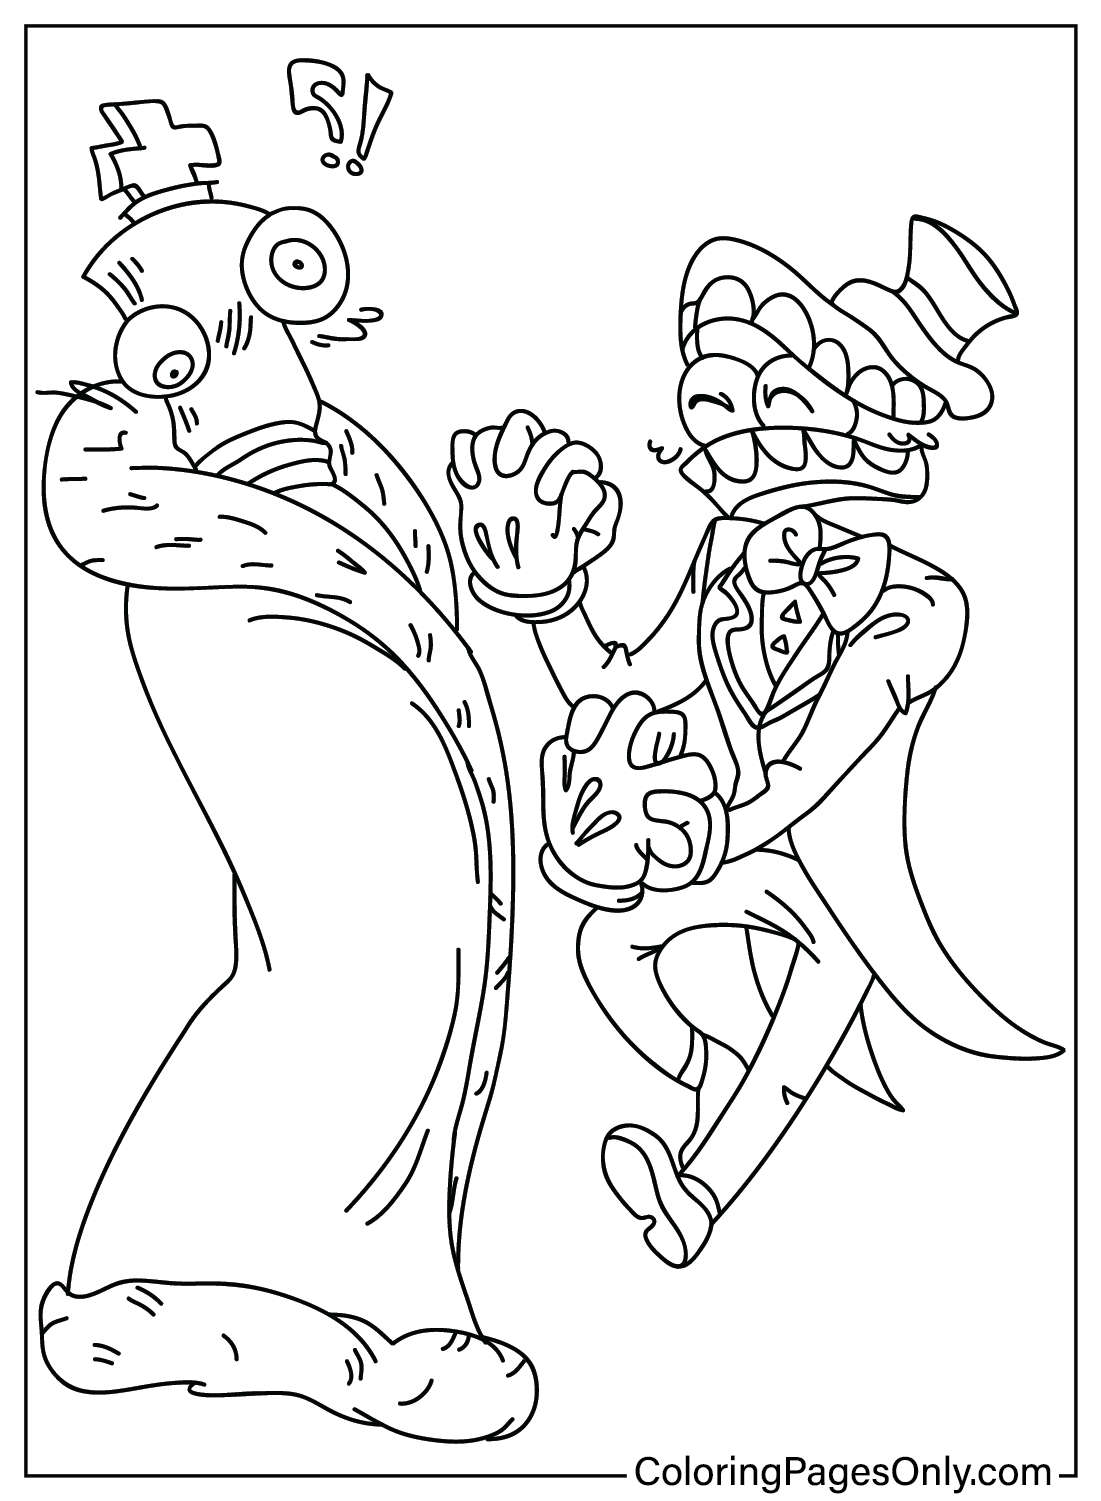 Kinger, Caine Coloring Page from Caine